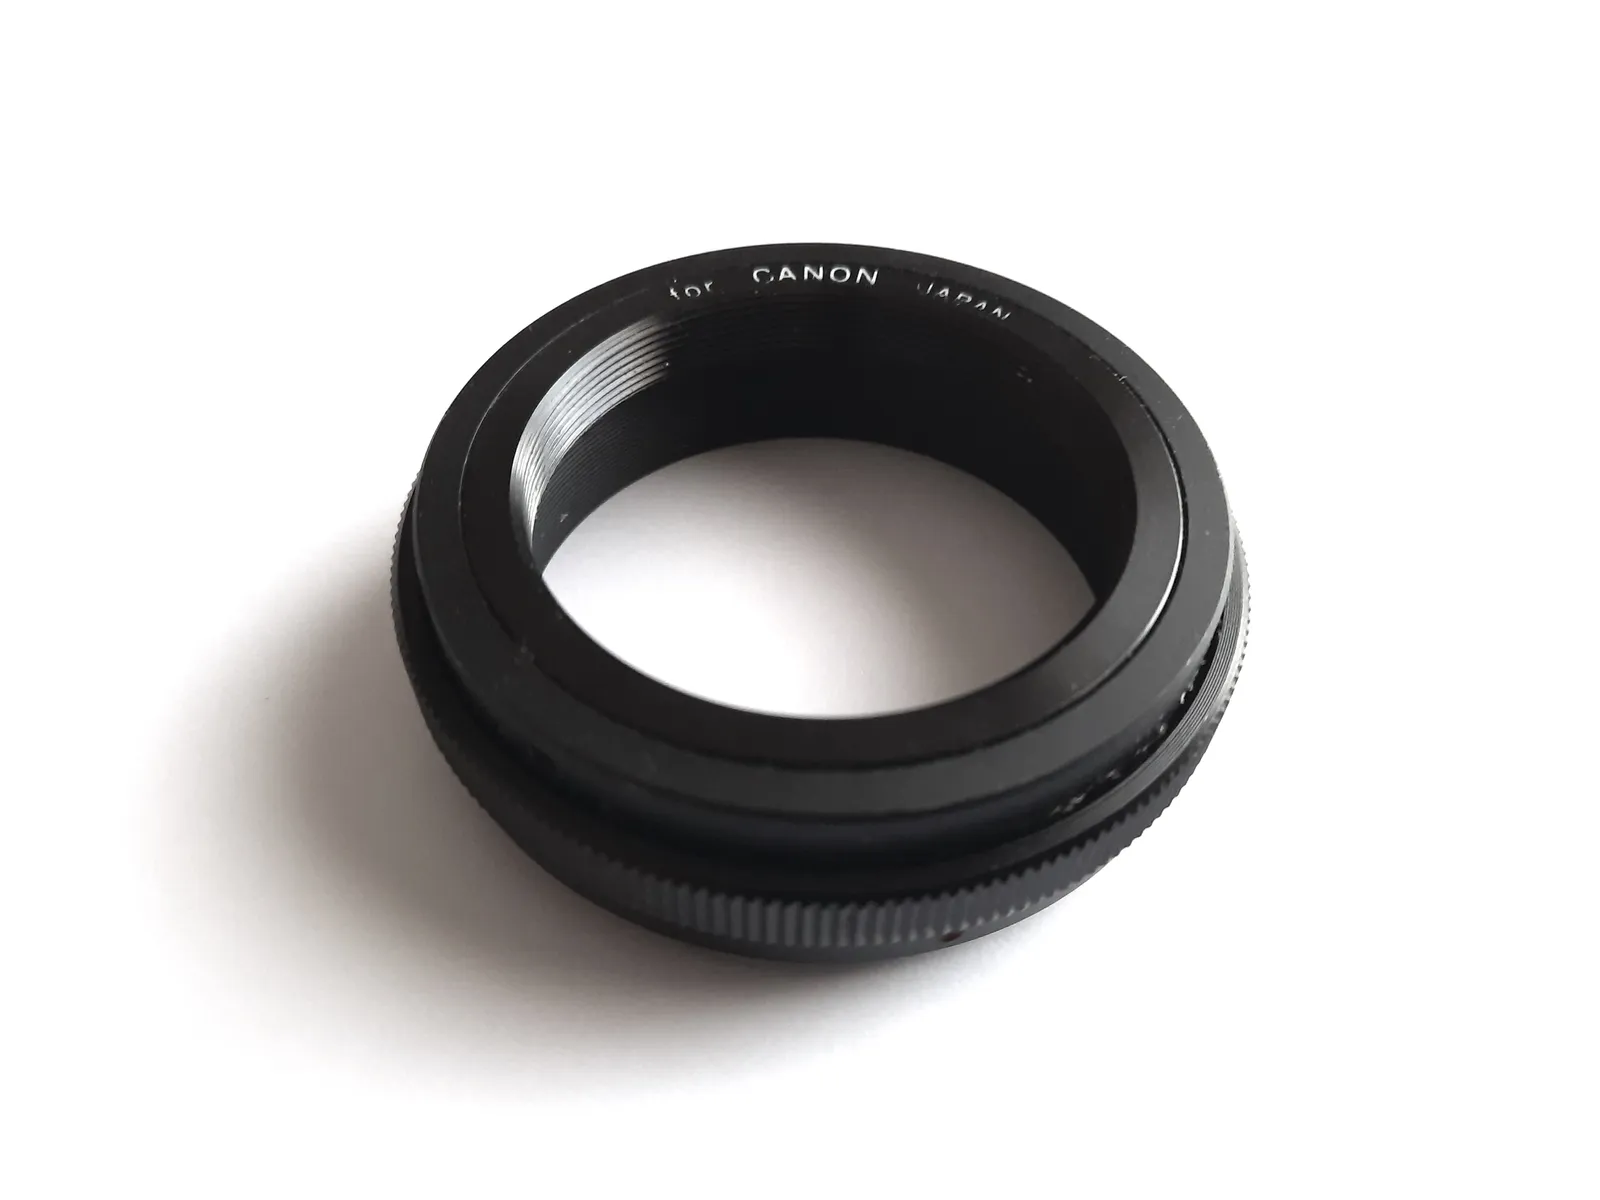 Vintage Canon AE-1 Bayonet Body Mount to 42 mm Lens Adapter Ring - Clean